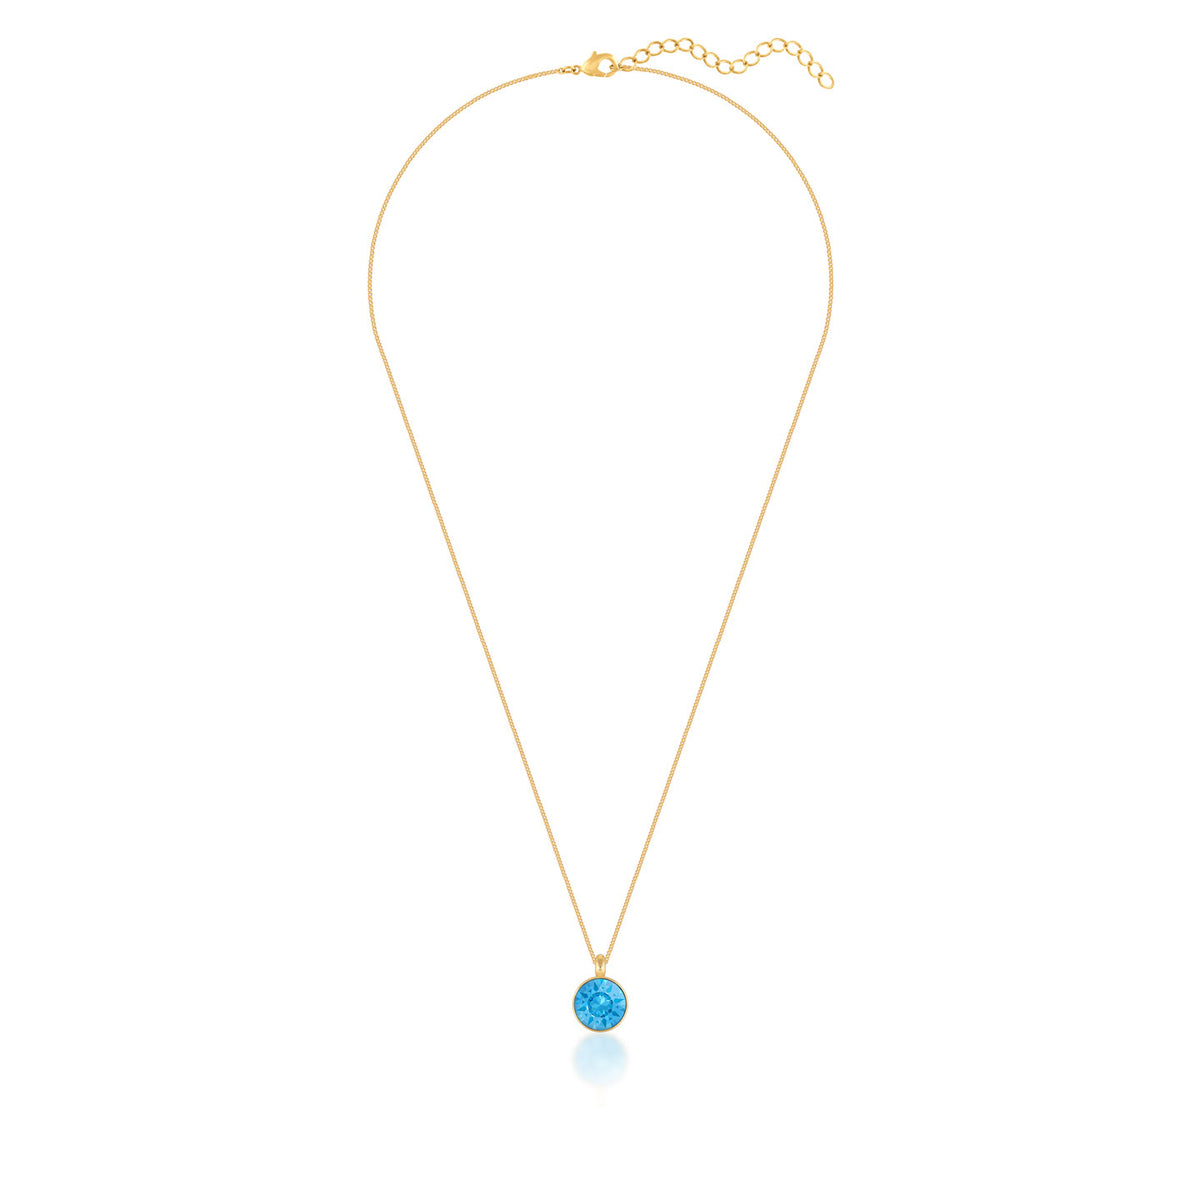 Bella Pendant Necklace with Blue Aquamarine Round Crystals from Swarovski Gold Plated - Ed Heart